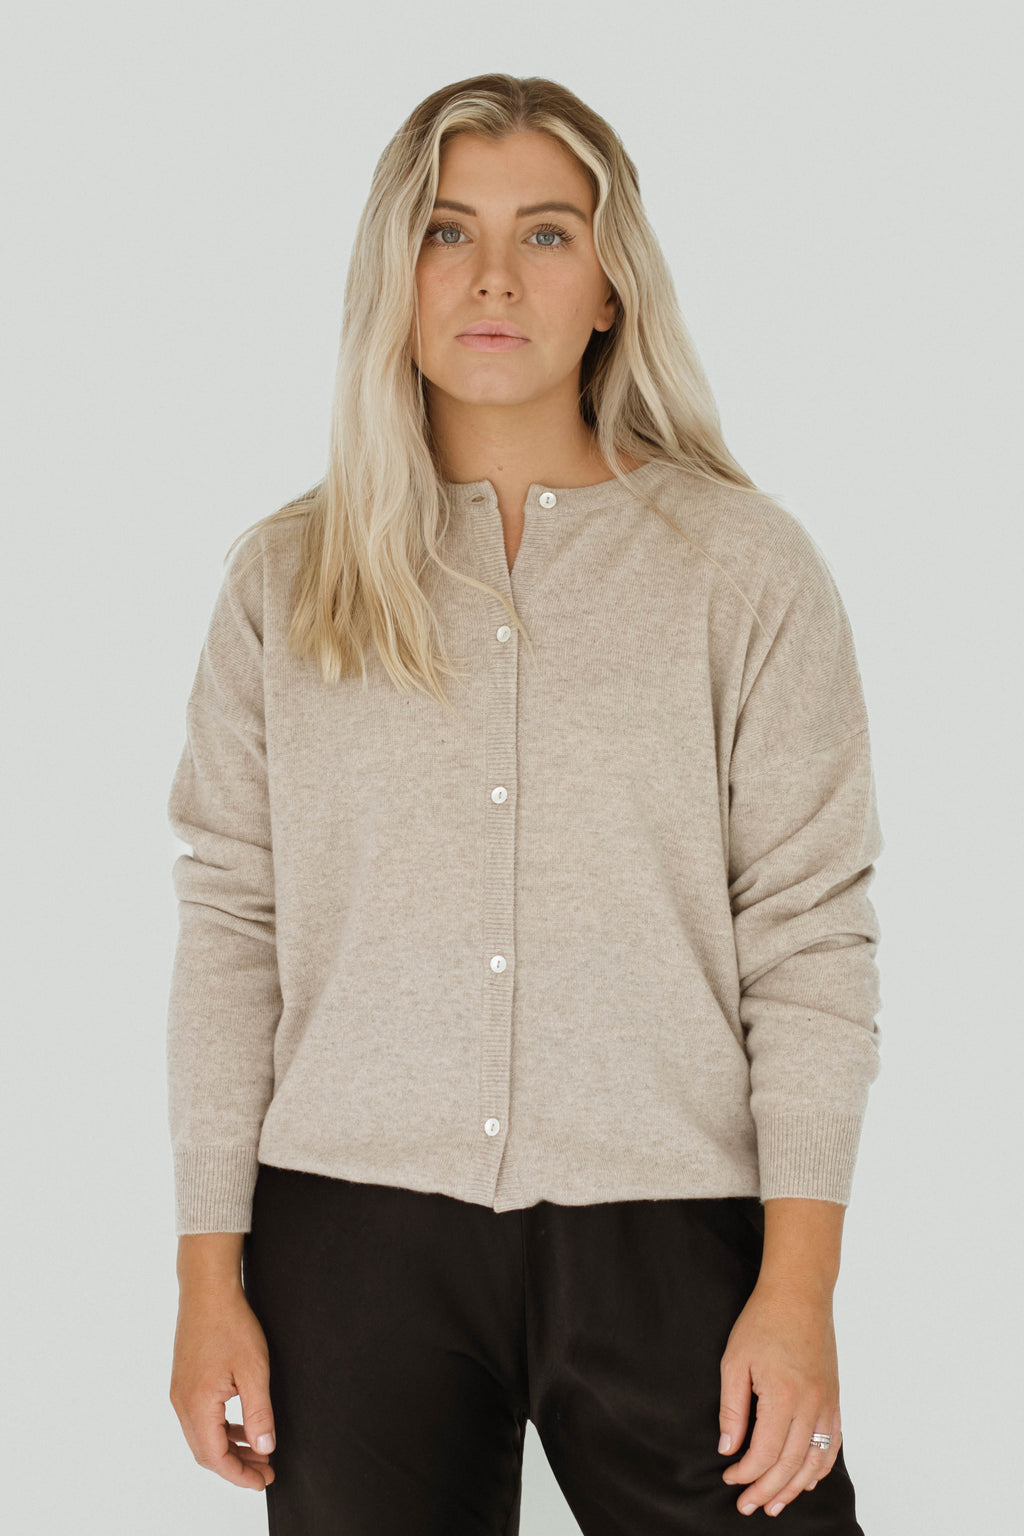 Preorder Cashmere Cardigan - Oatmeal